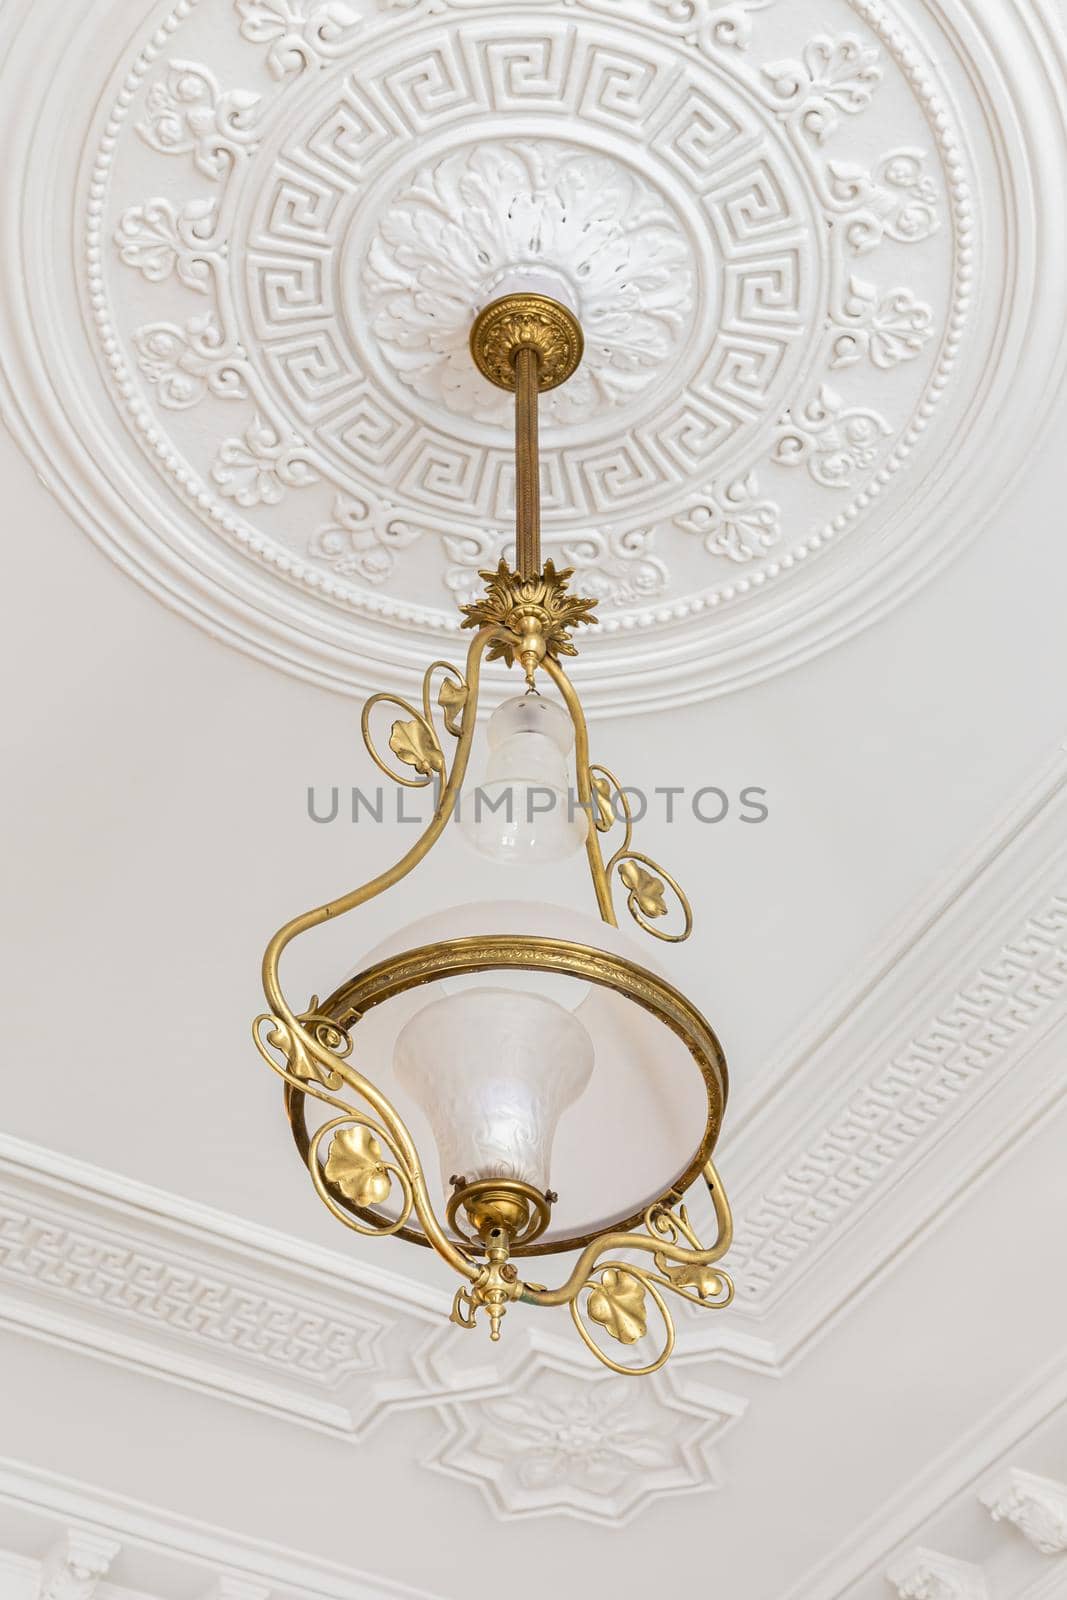 Vintage chandelier in the interior of white room with stucco molding on the ceiling by apavlin